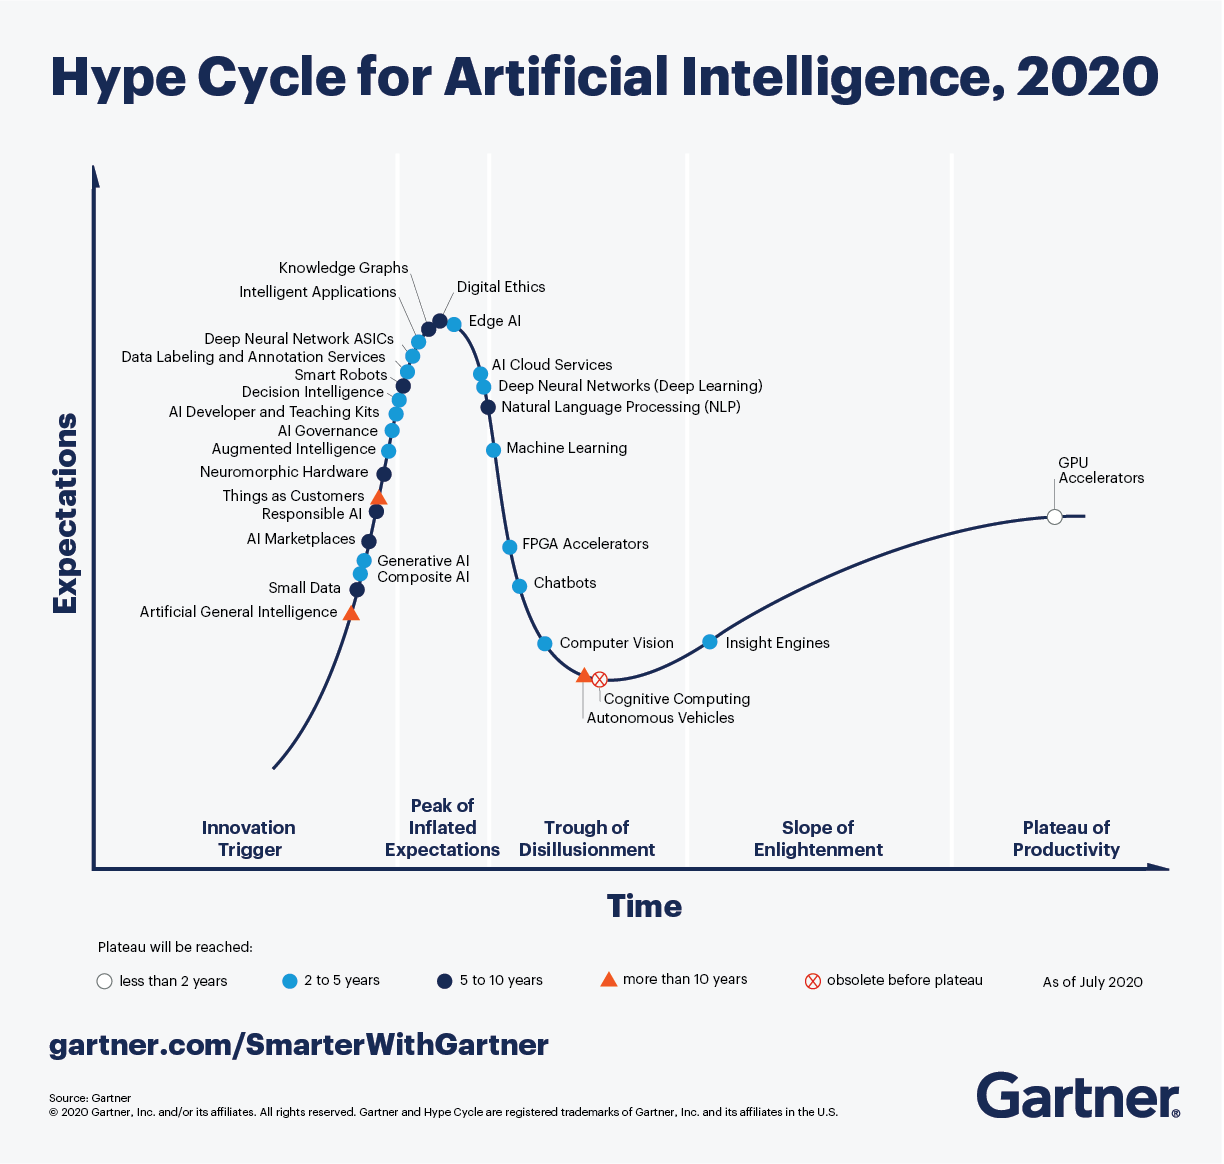 Gartner_Hype_Cycle_for_Artificial_Intelligence_2020.png